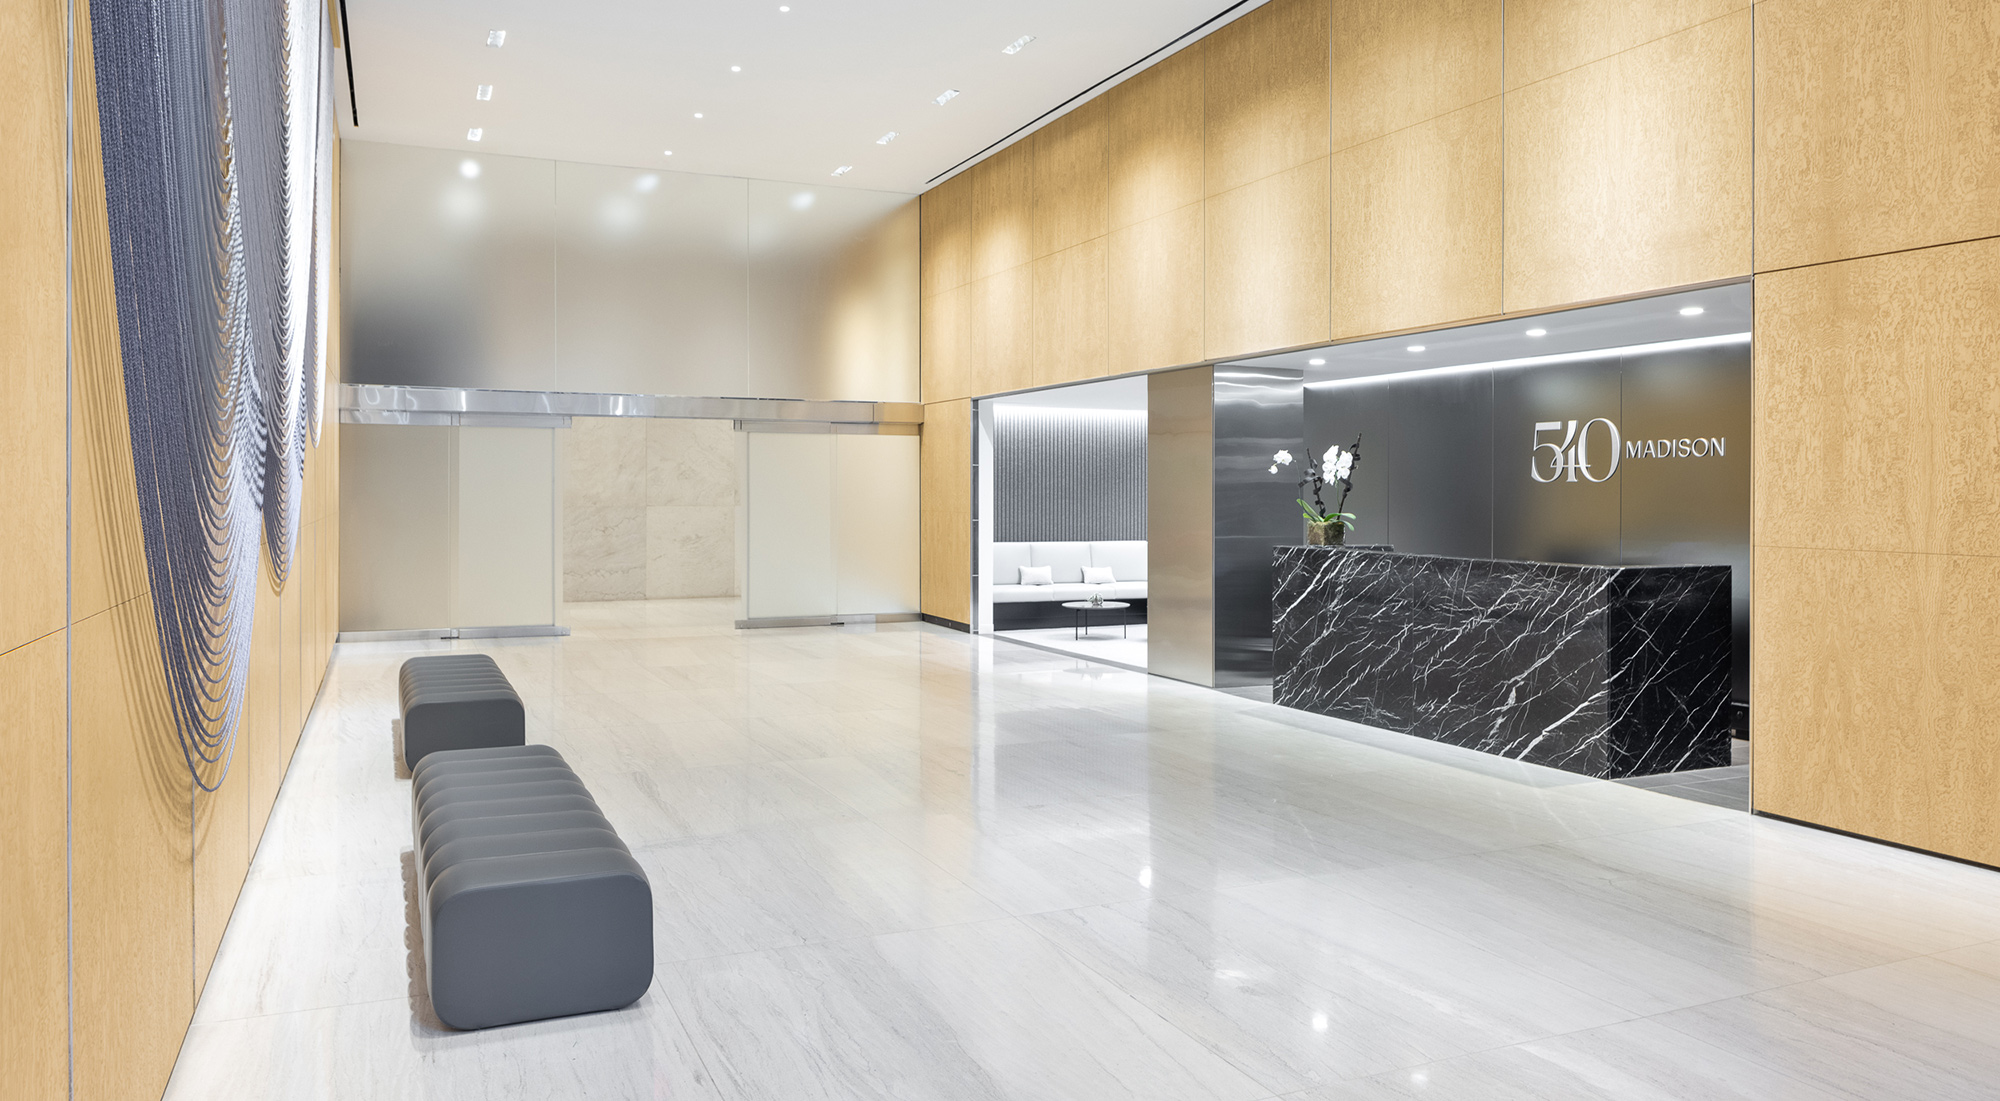 Highly modern lobby space and front desk with white marble floors